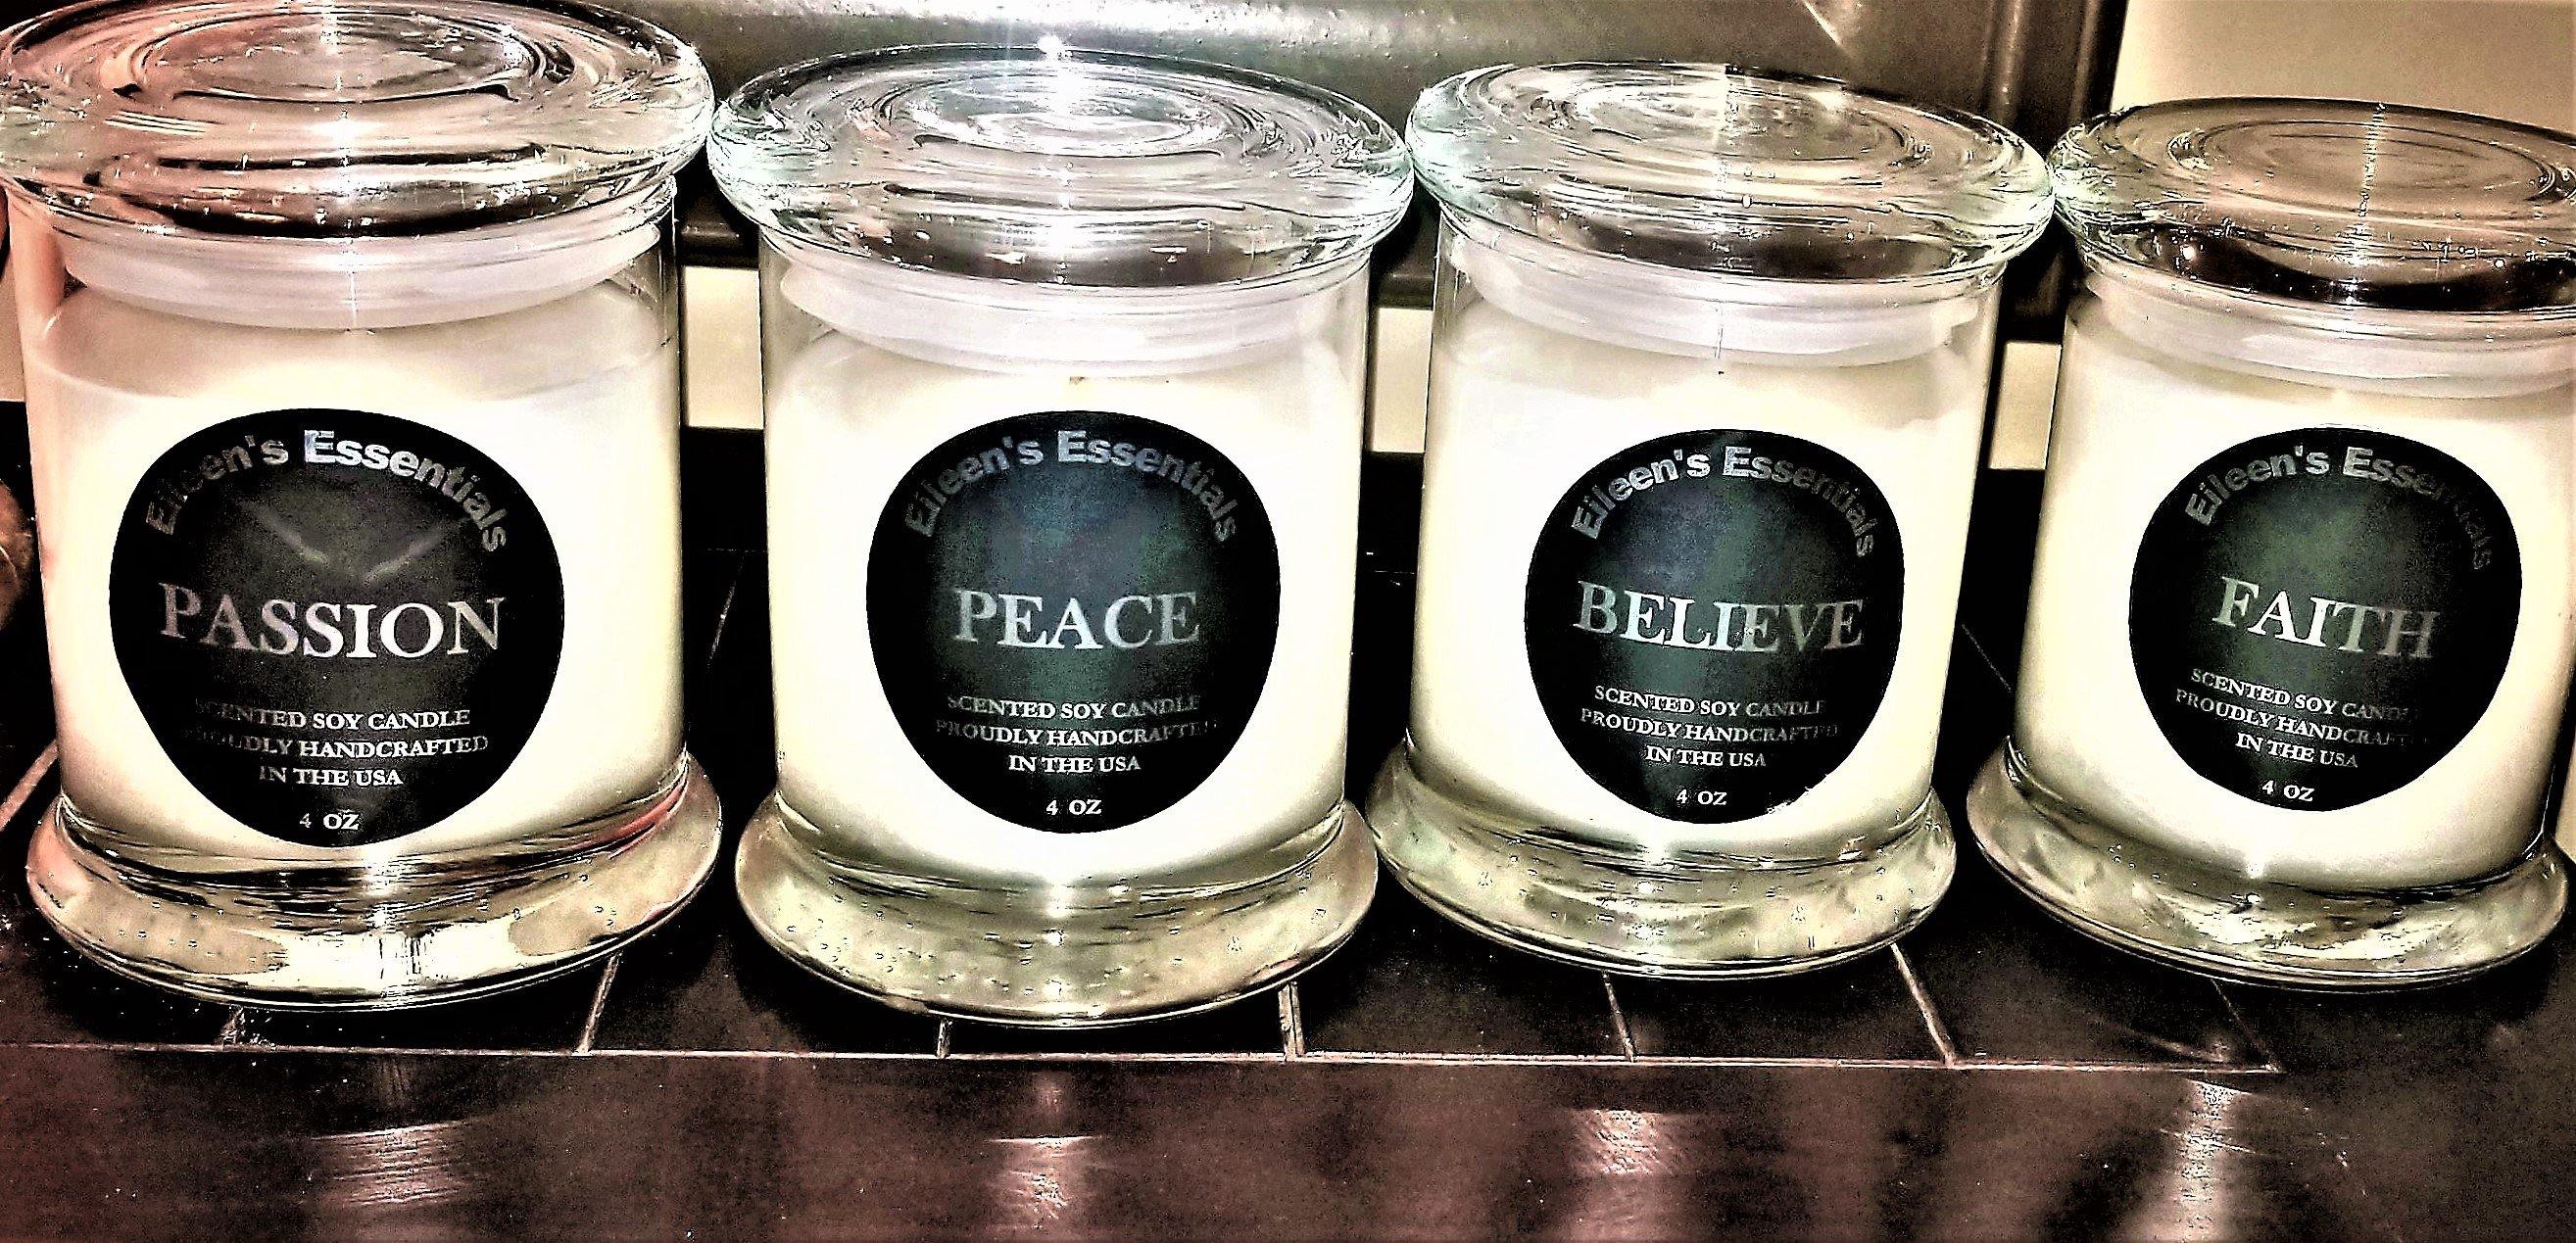 Candle Inspirational Collection; COURAGE - Eileen's Essentials